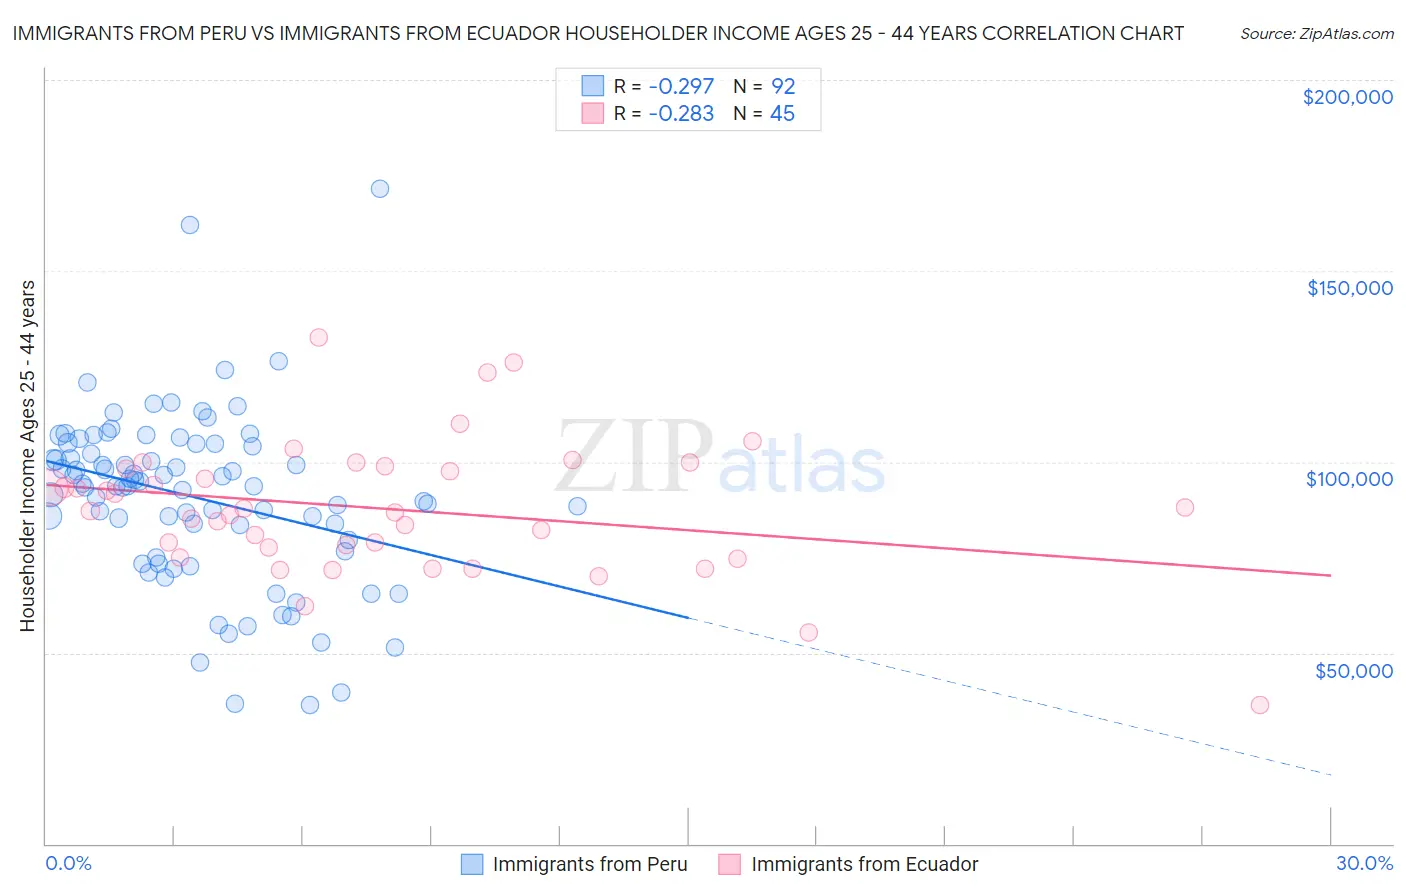 Immigrants from Peru vs Immigrants from Ecuador Householder Income Ages 25 - 44 years